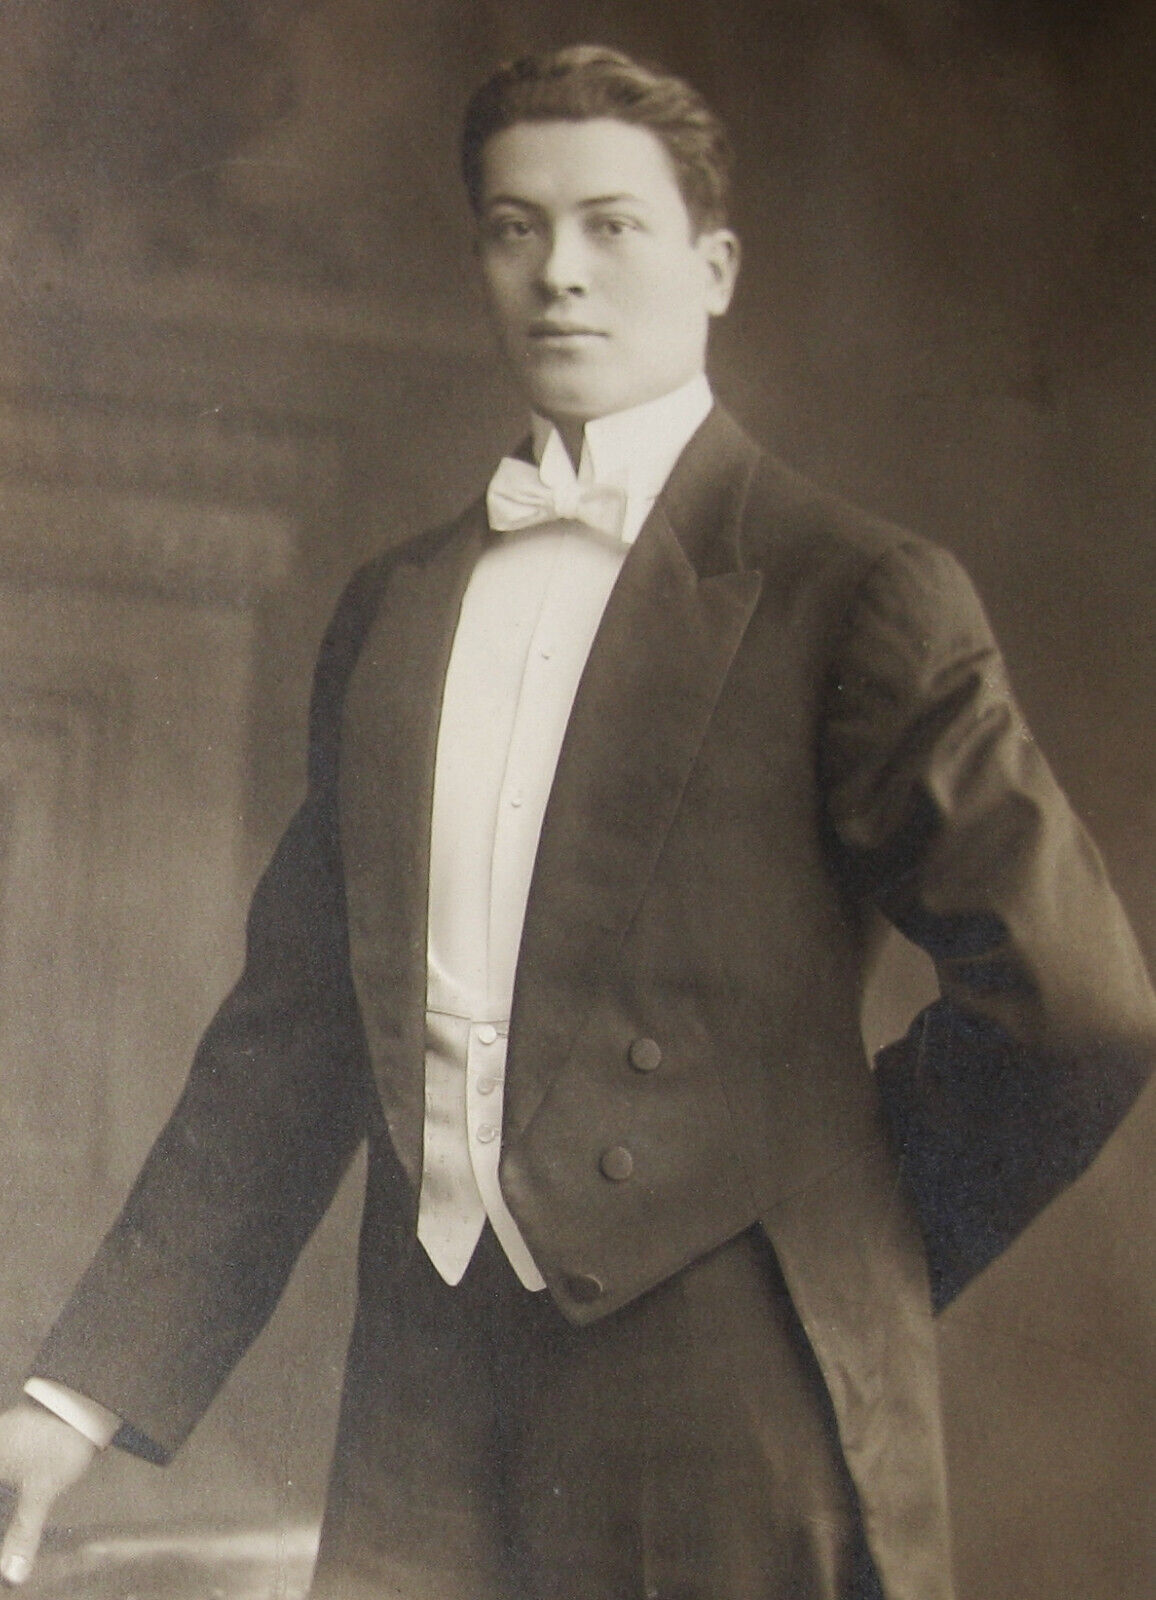 VINTAGE PHOTO OF AN EXCEPTIONALLY HANDSOME DAPPER YOUNG MAN WEARING A TUXEDO